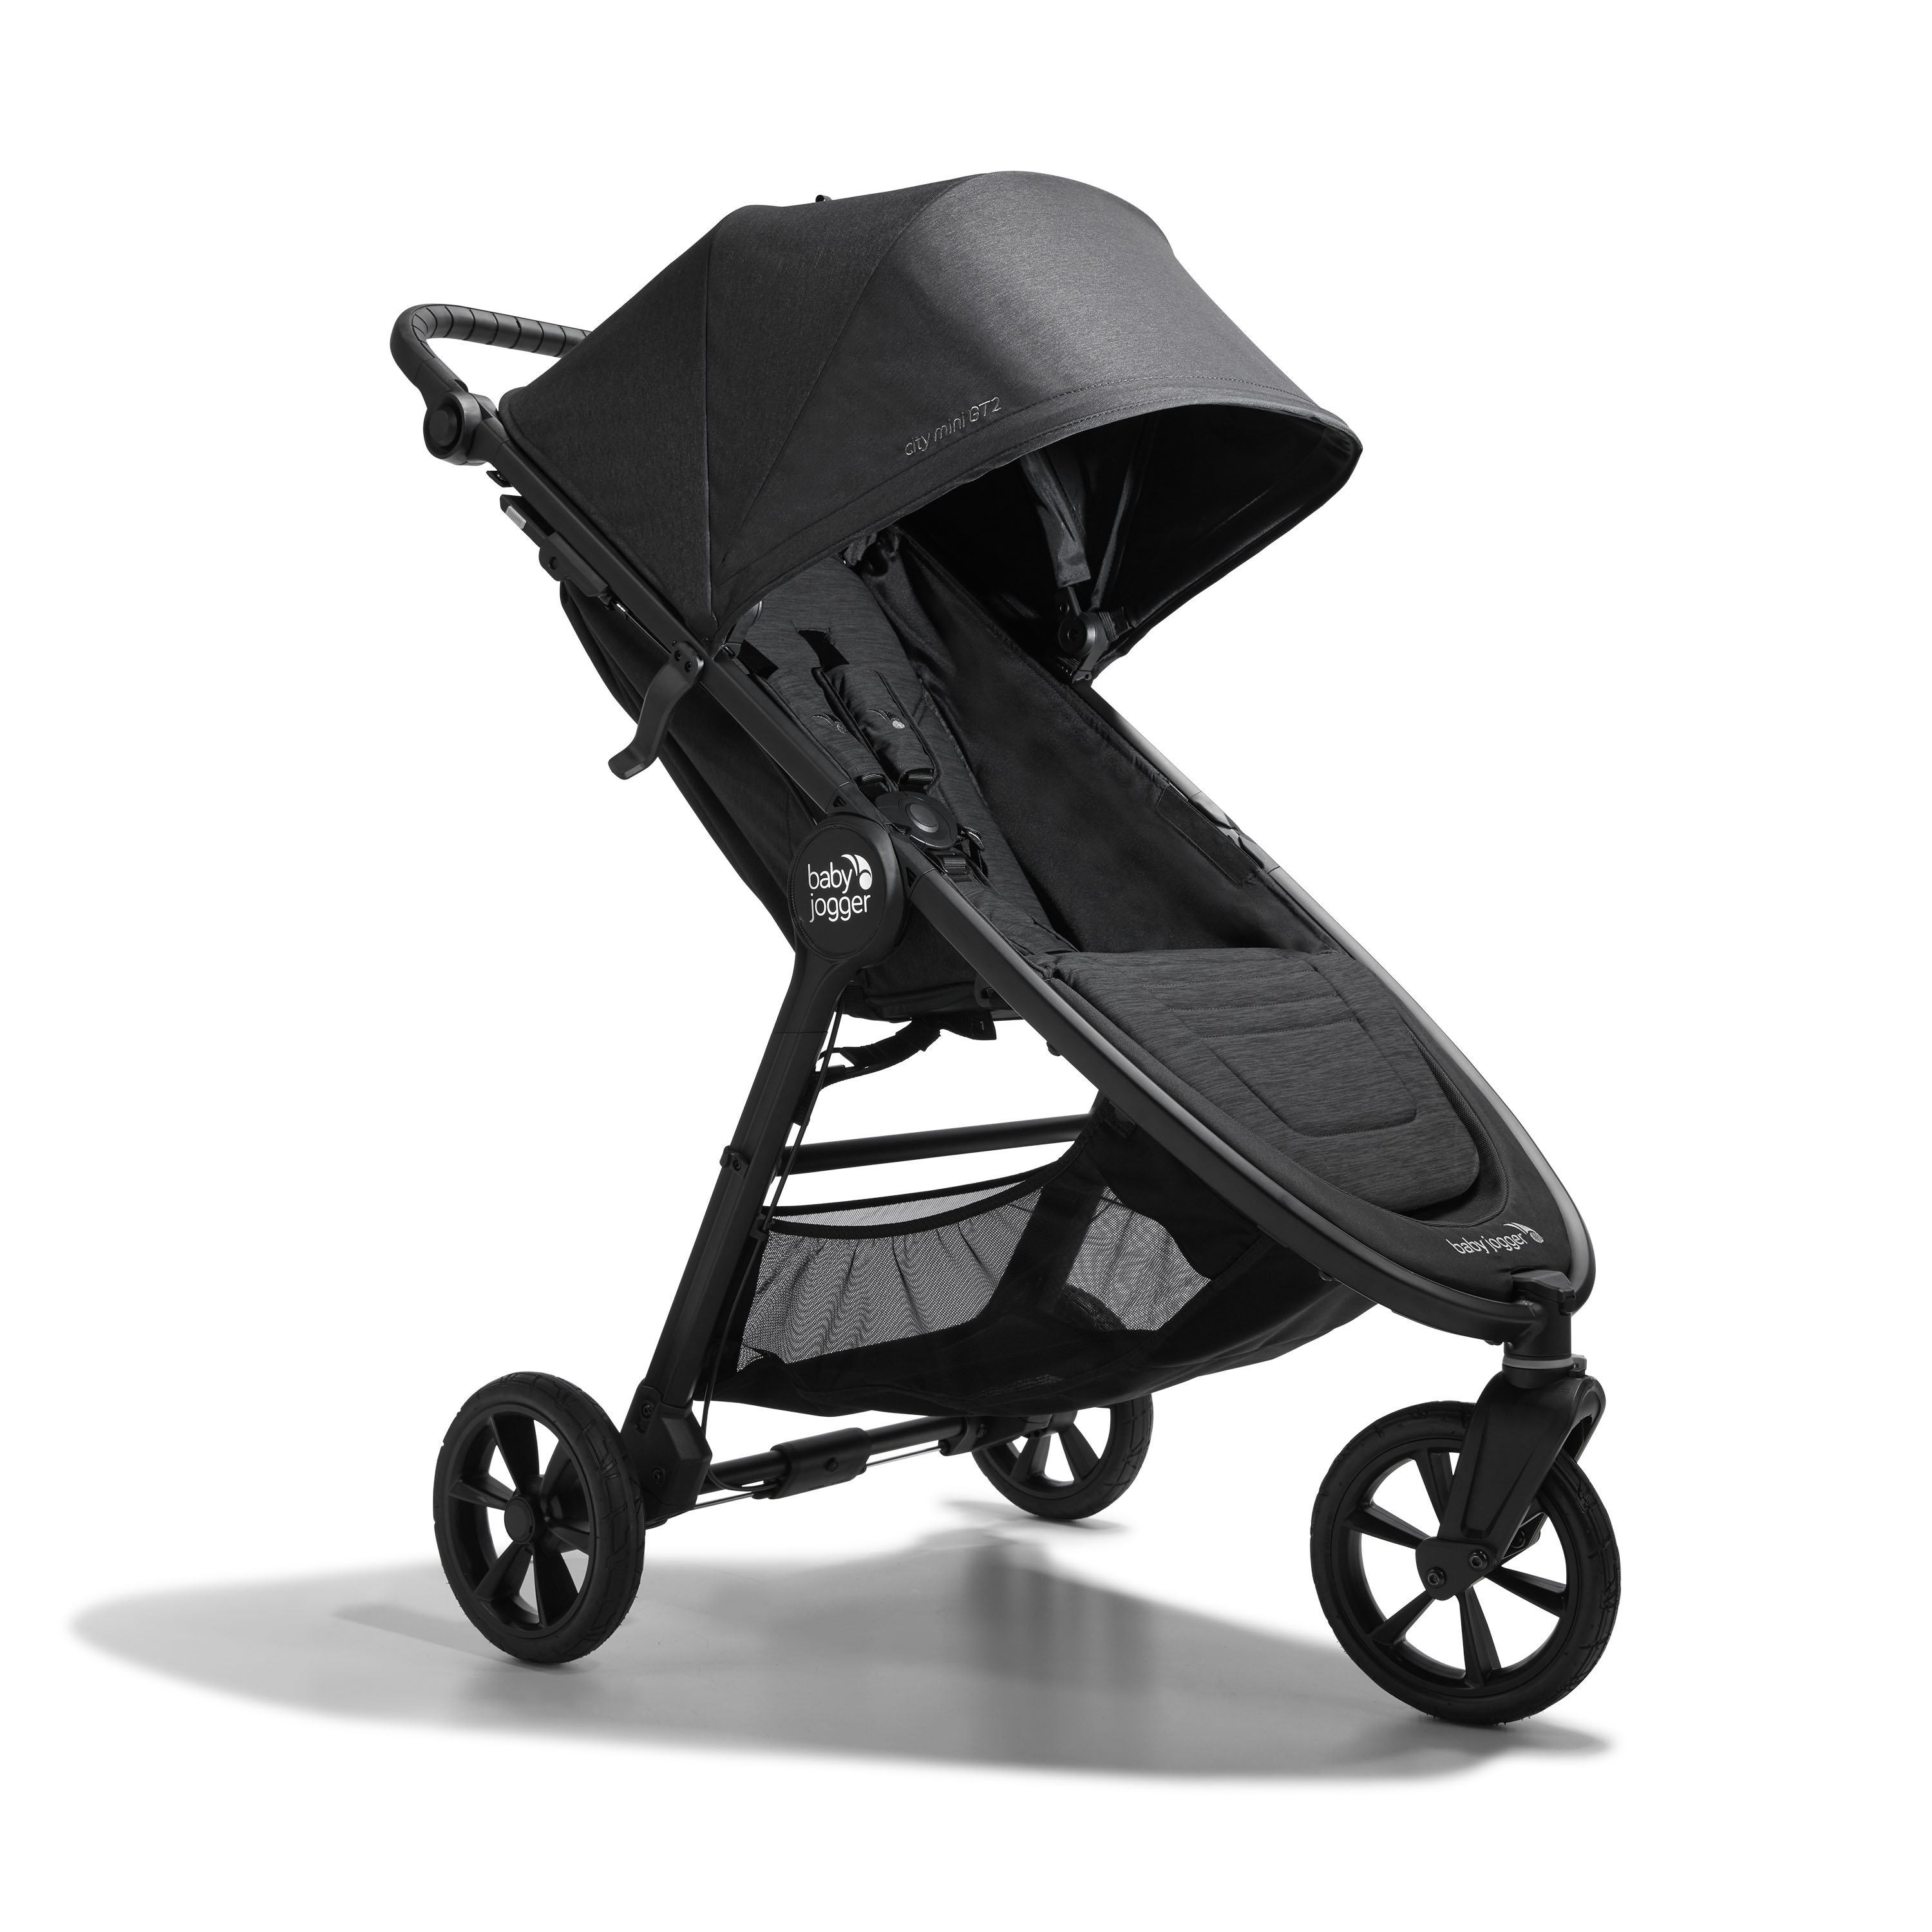 søster Tredive pustes op Baby Jogger city mini® GT2 stroller | Baby Jogger